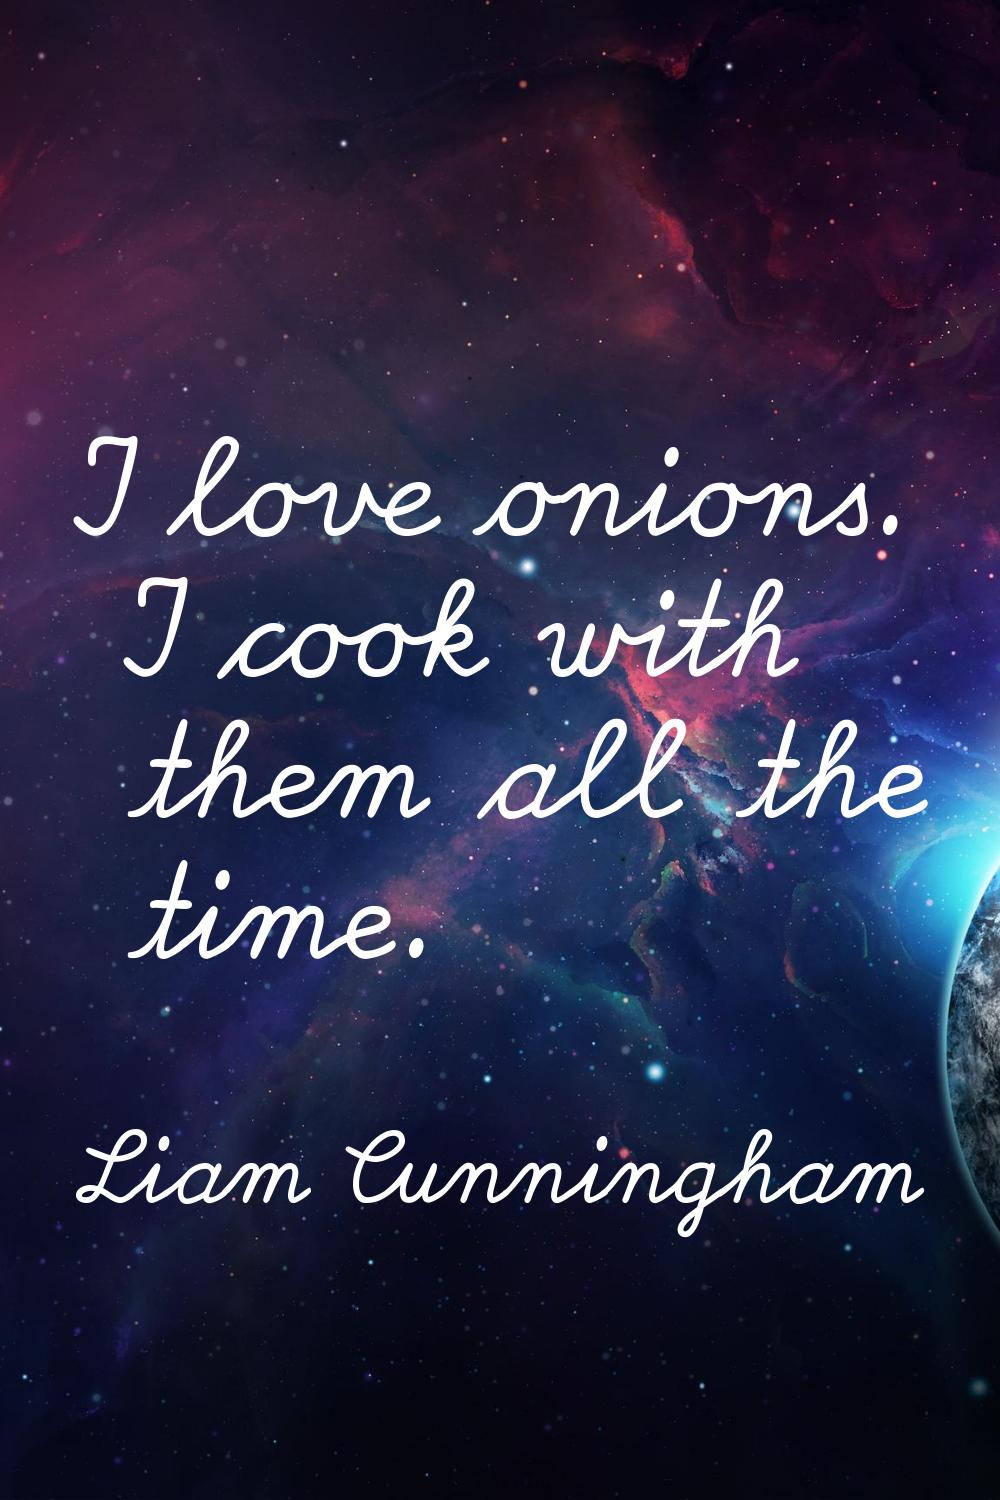 I love onions. I cook with them all the time.